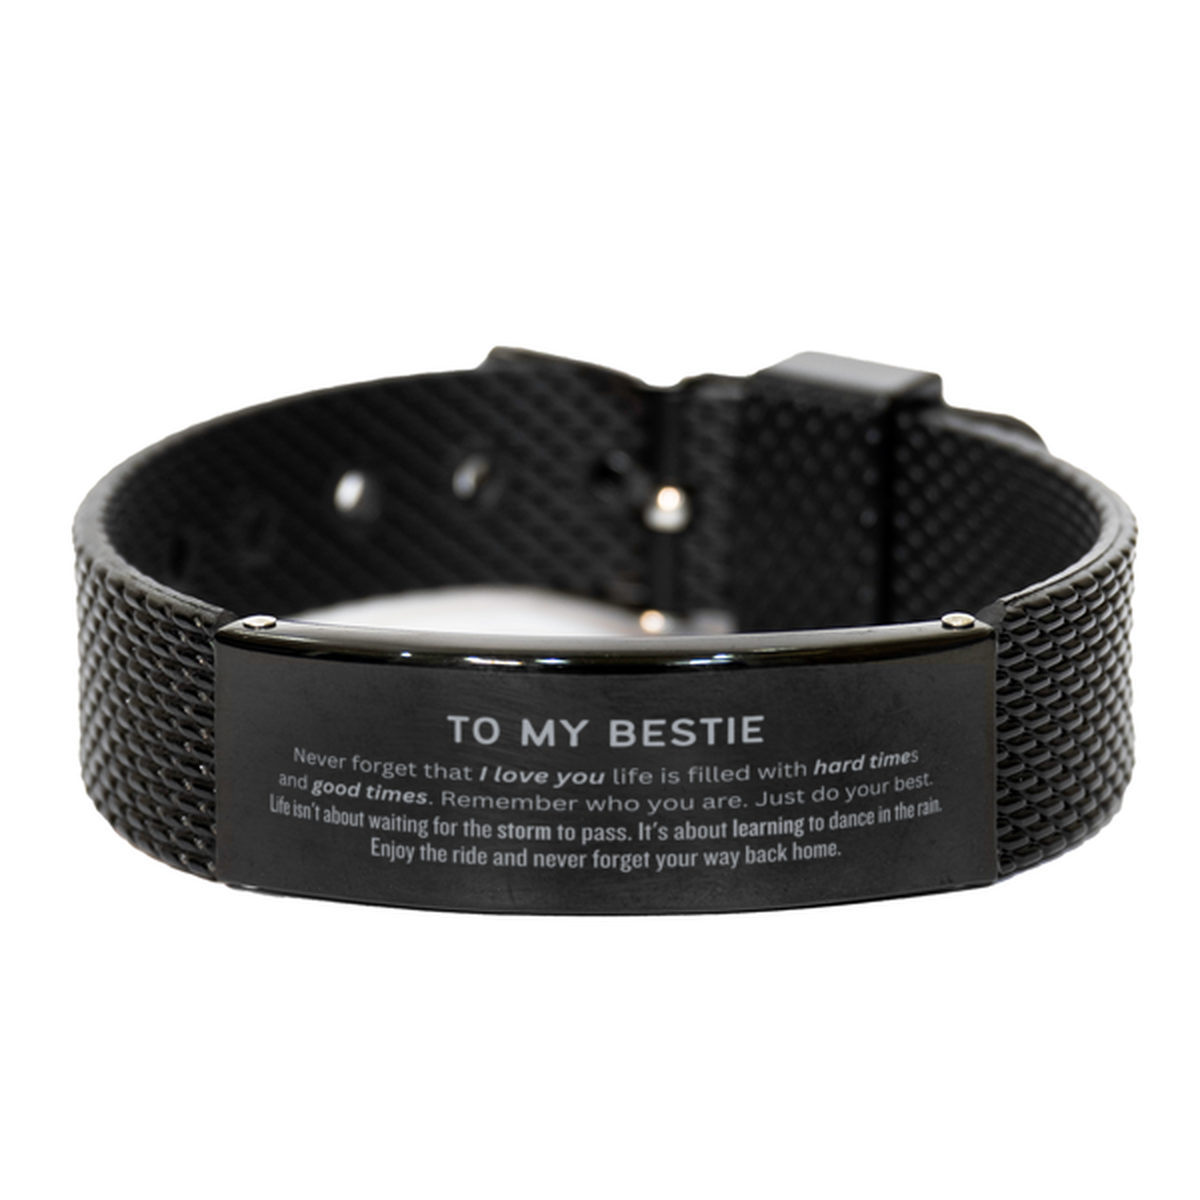 Christmas Bestie Black Shark Mesh Bracelet Gifts, To My Bestie Birthday Thank You Gifts For Bestie, Graduation Unique Gifts For Bestie To My Bestie Never forget that I love you life is filled with hard times and good times. Remember who you are. Just do y